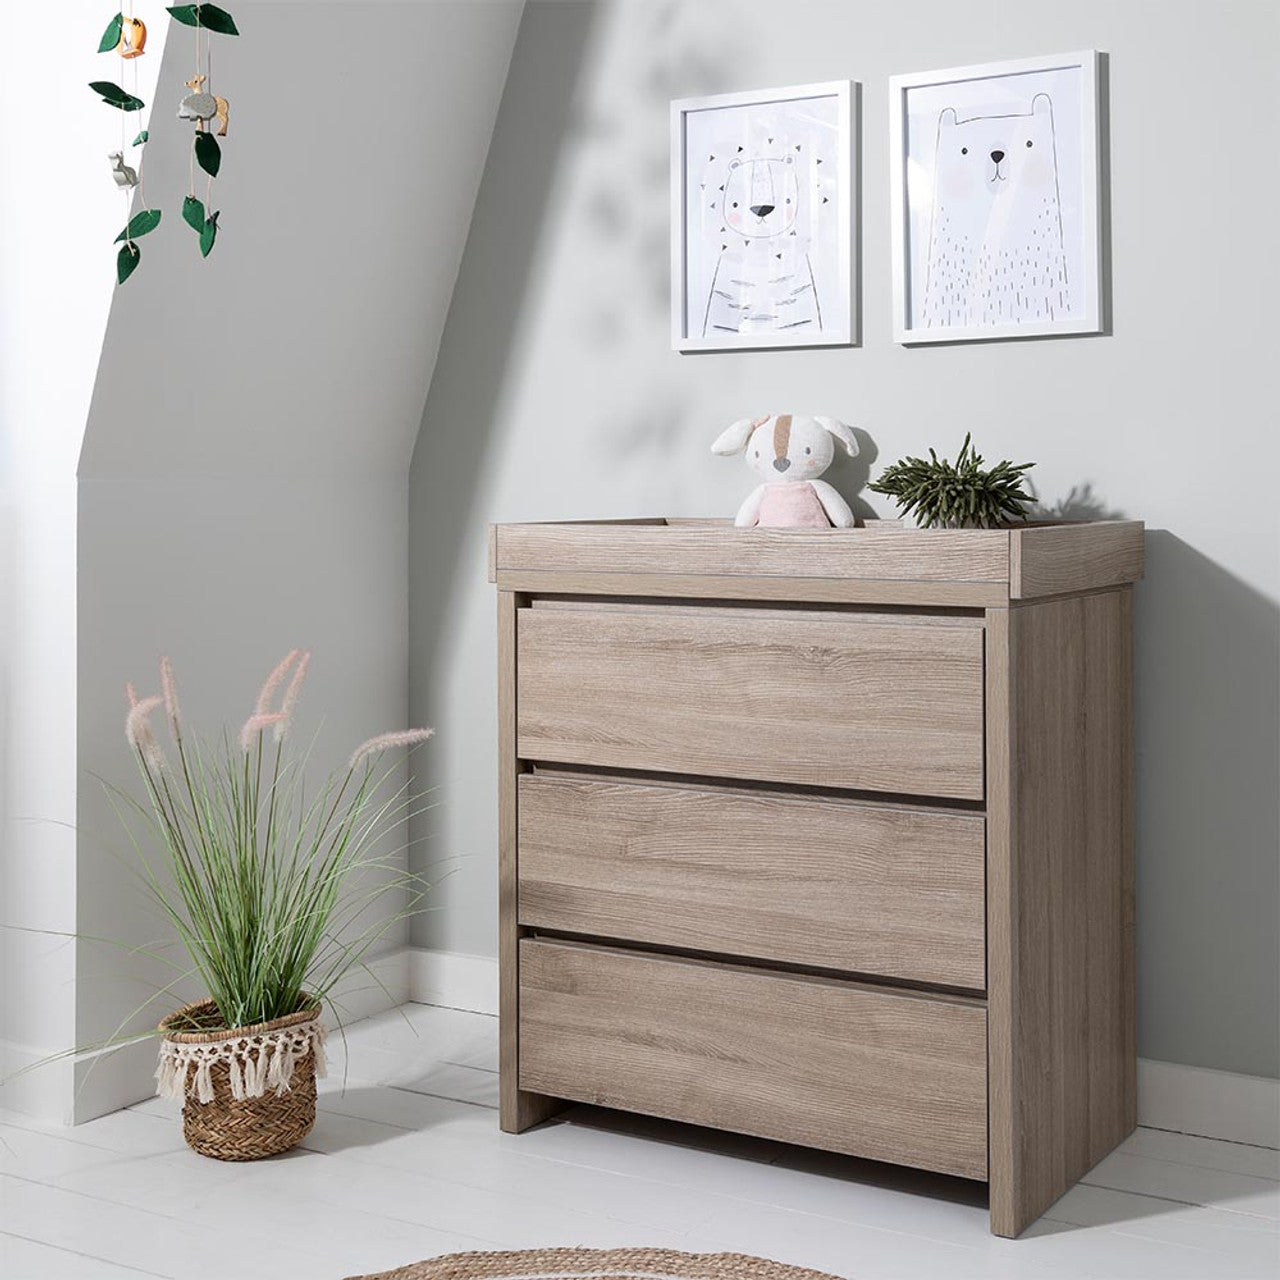 Tutti Bambini Modena Chest Changer - Oak - For Your Little One